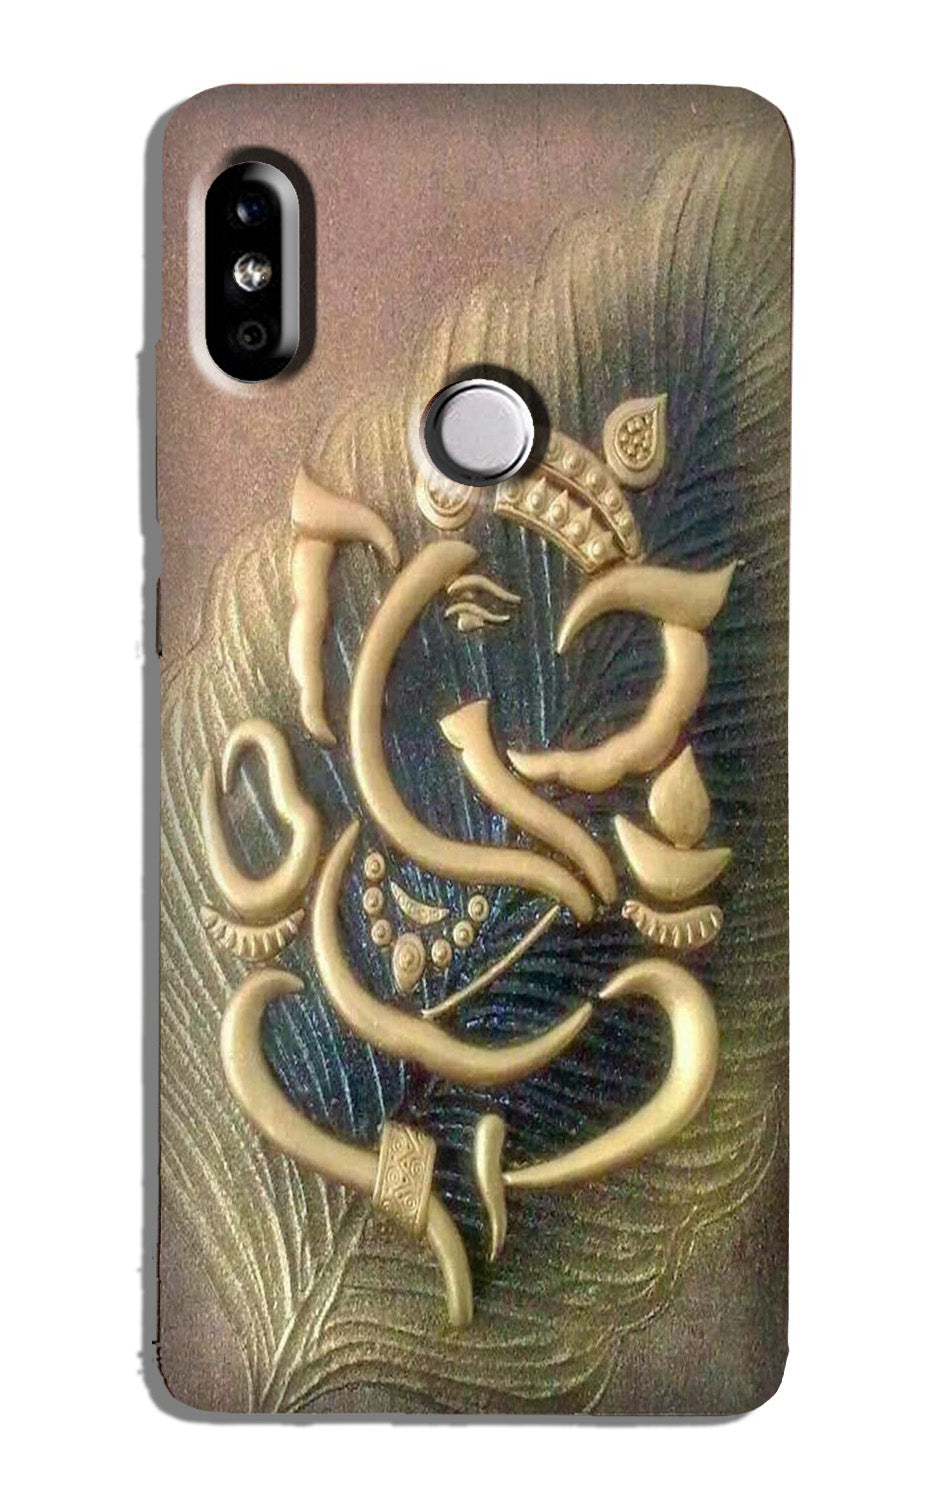 Lord Ganesha Case for Redmi Note 6 Pro